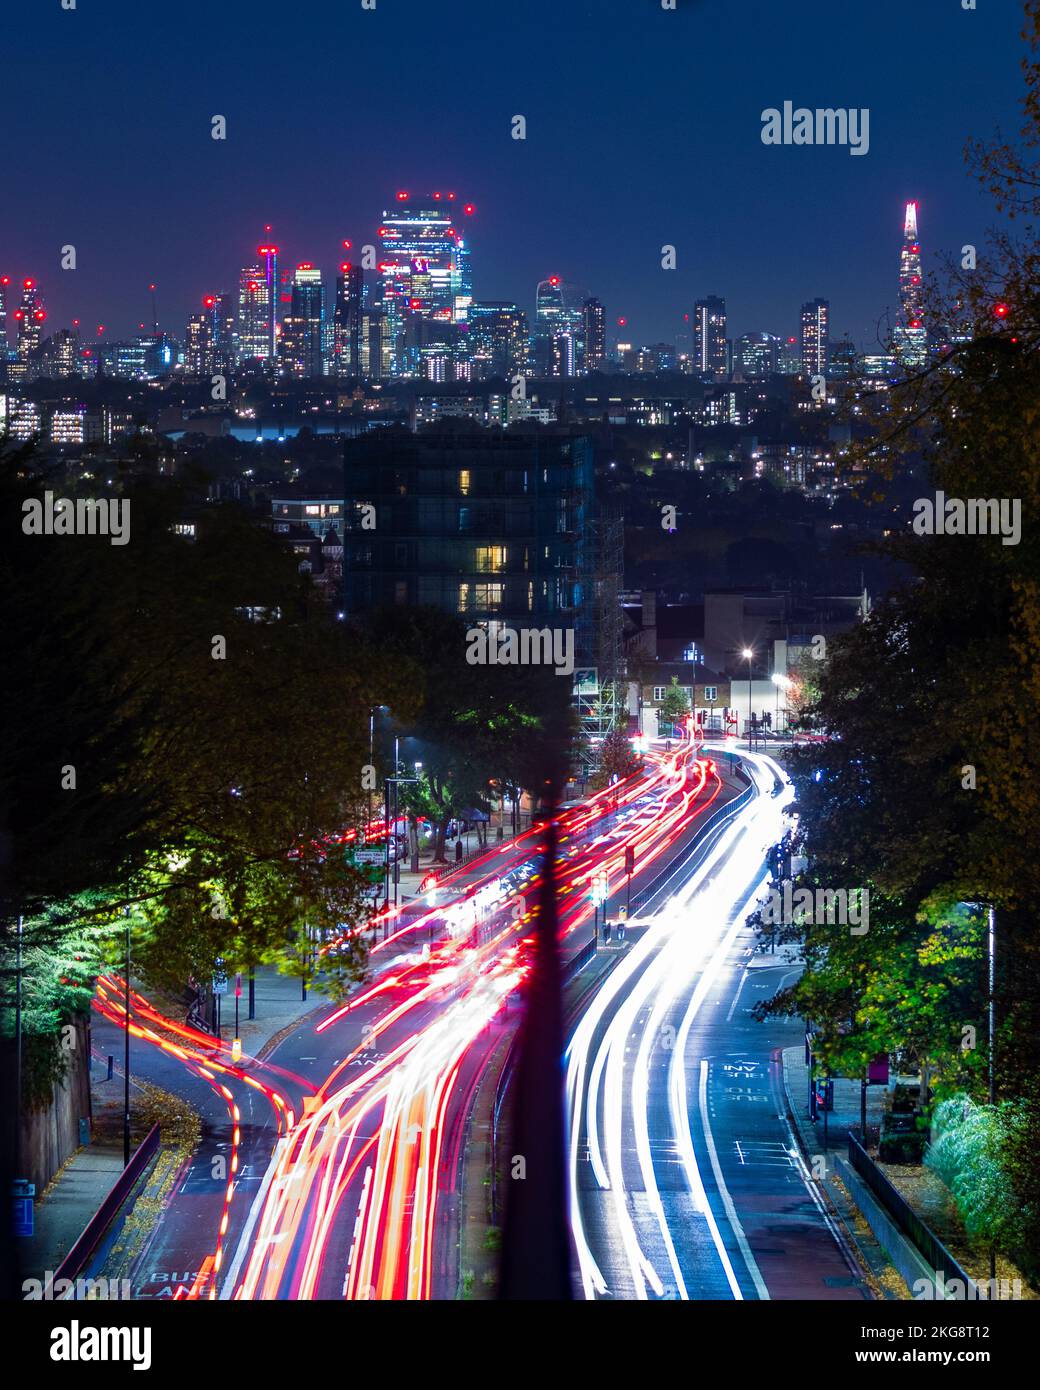 A view of the London skyline taken at night with light trails, showing a range of important and famous buidings against the back drop of a blue night Stock Photo